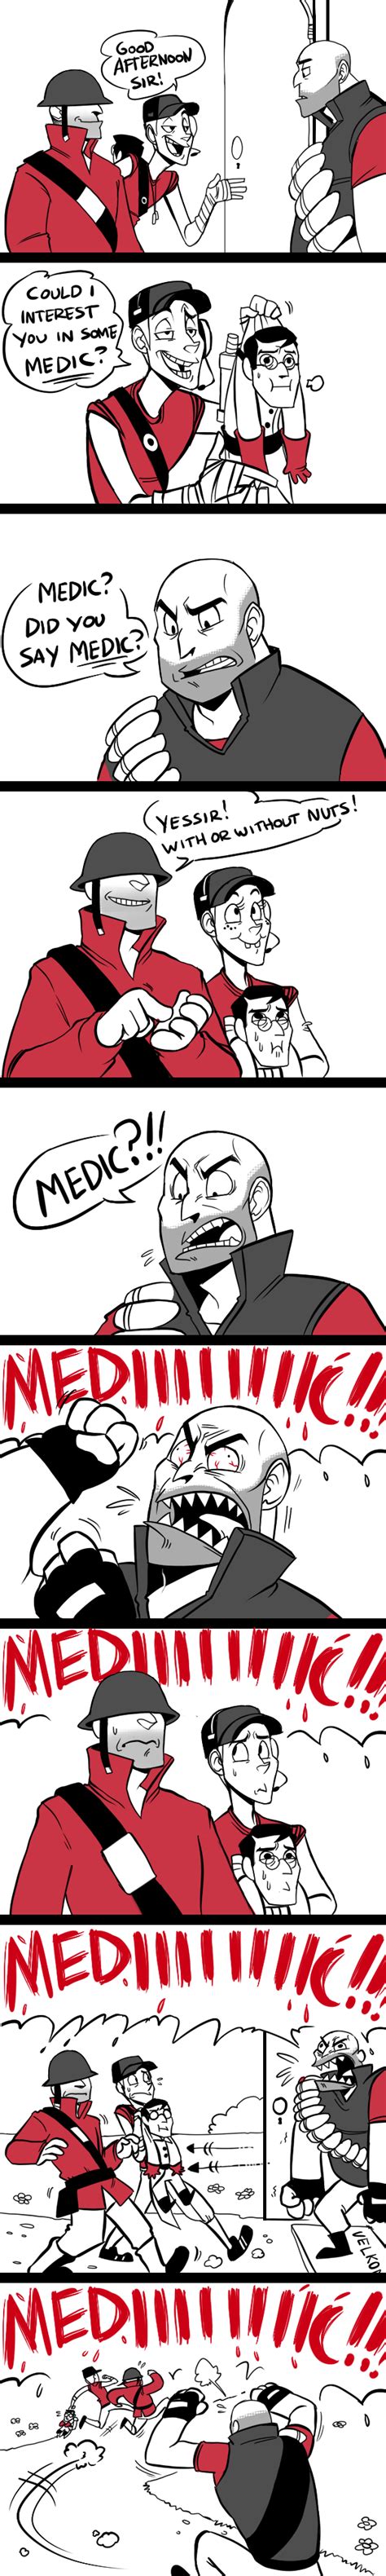 Medic Team Fortress 2 Know Your Meme